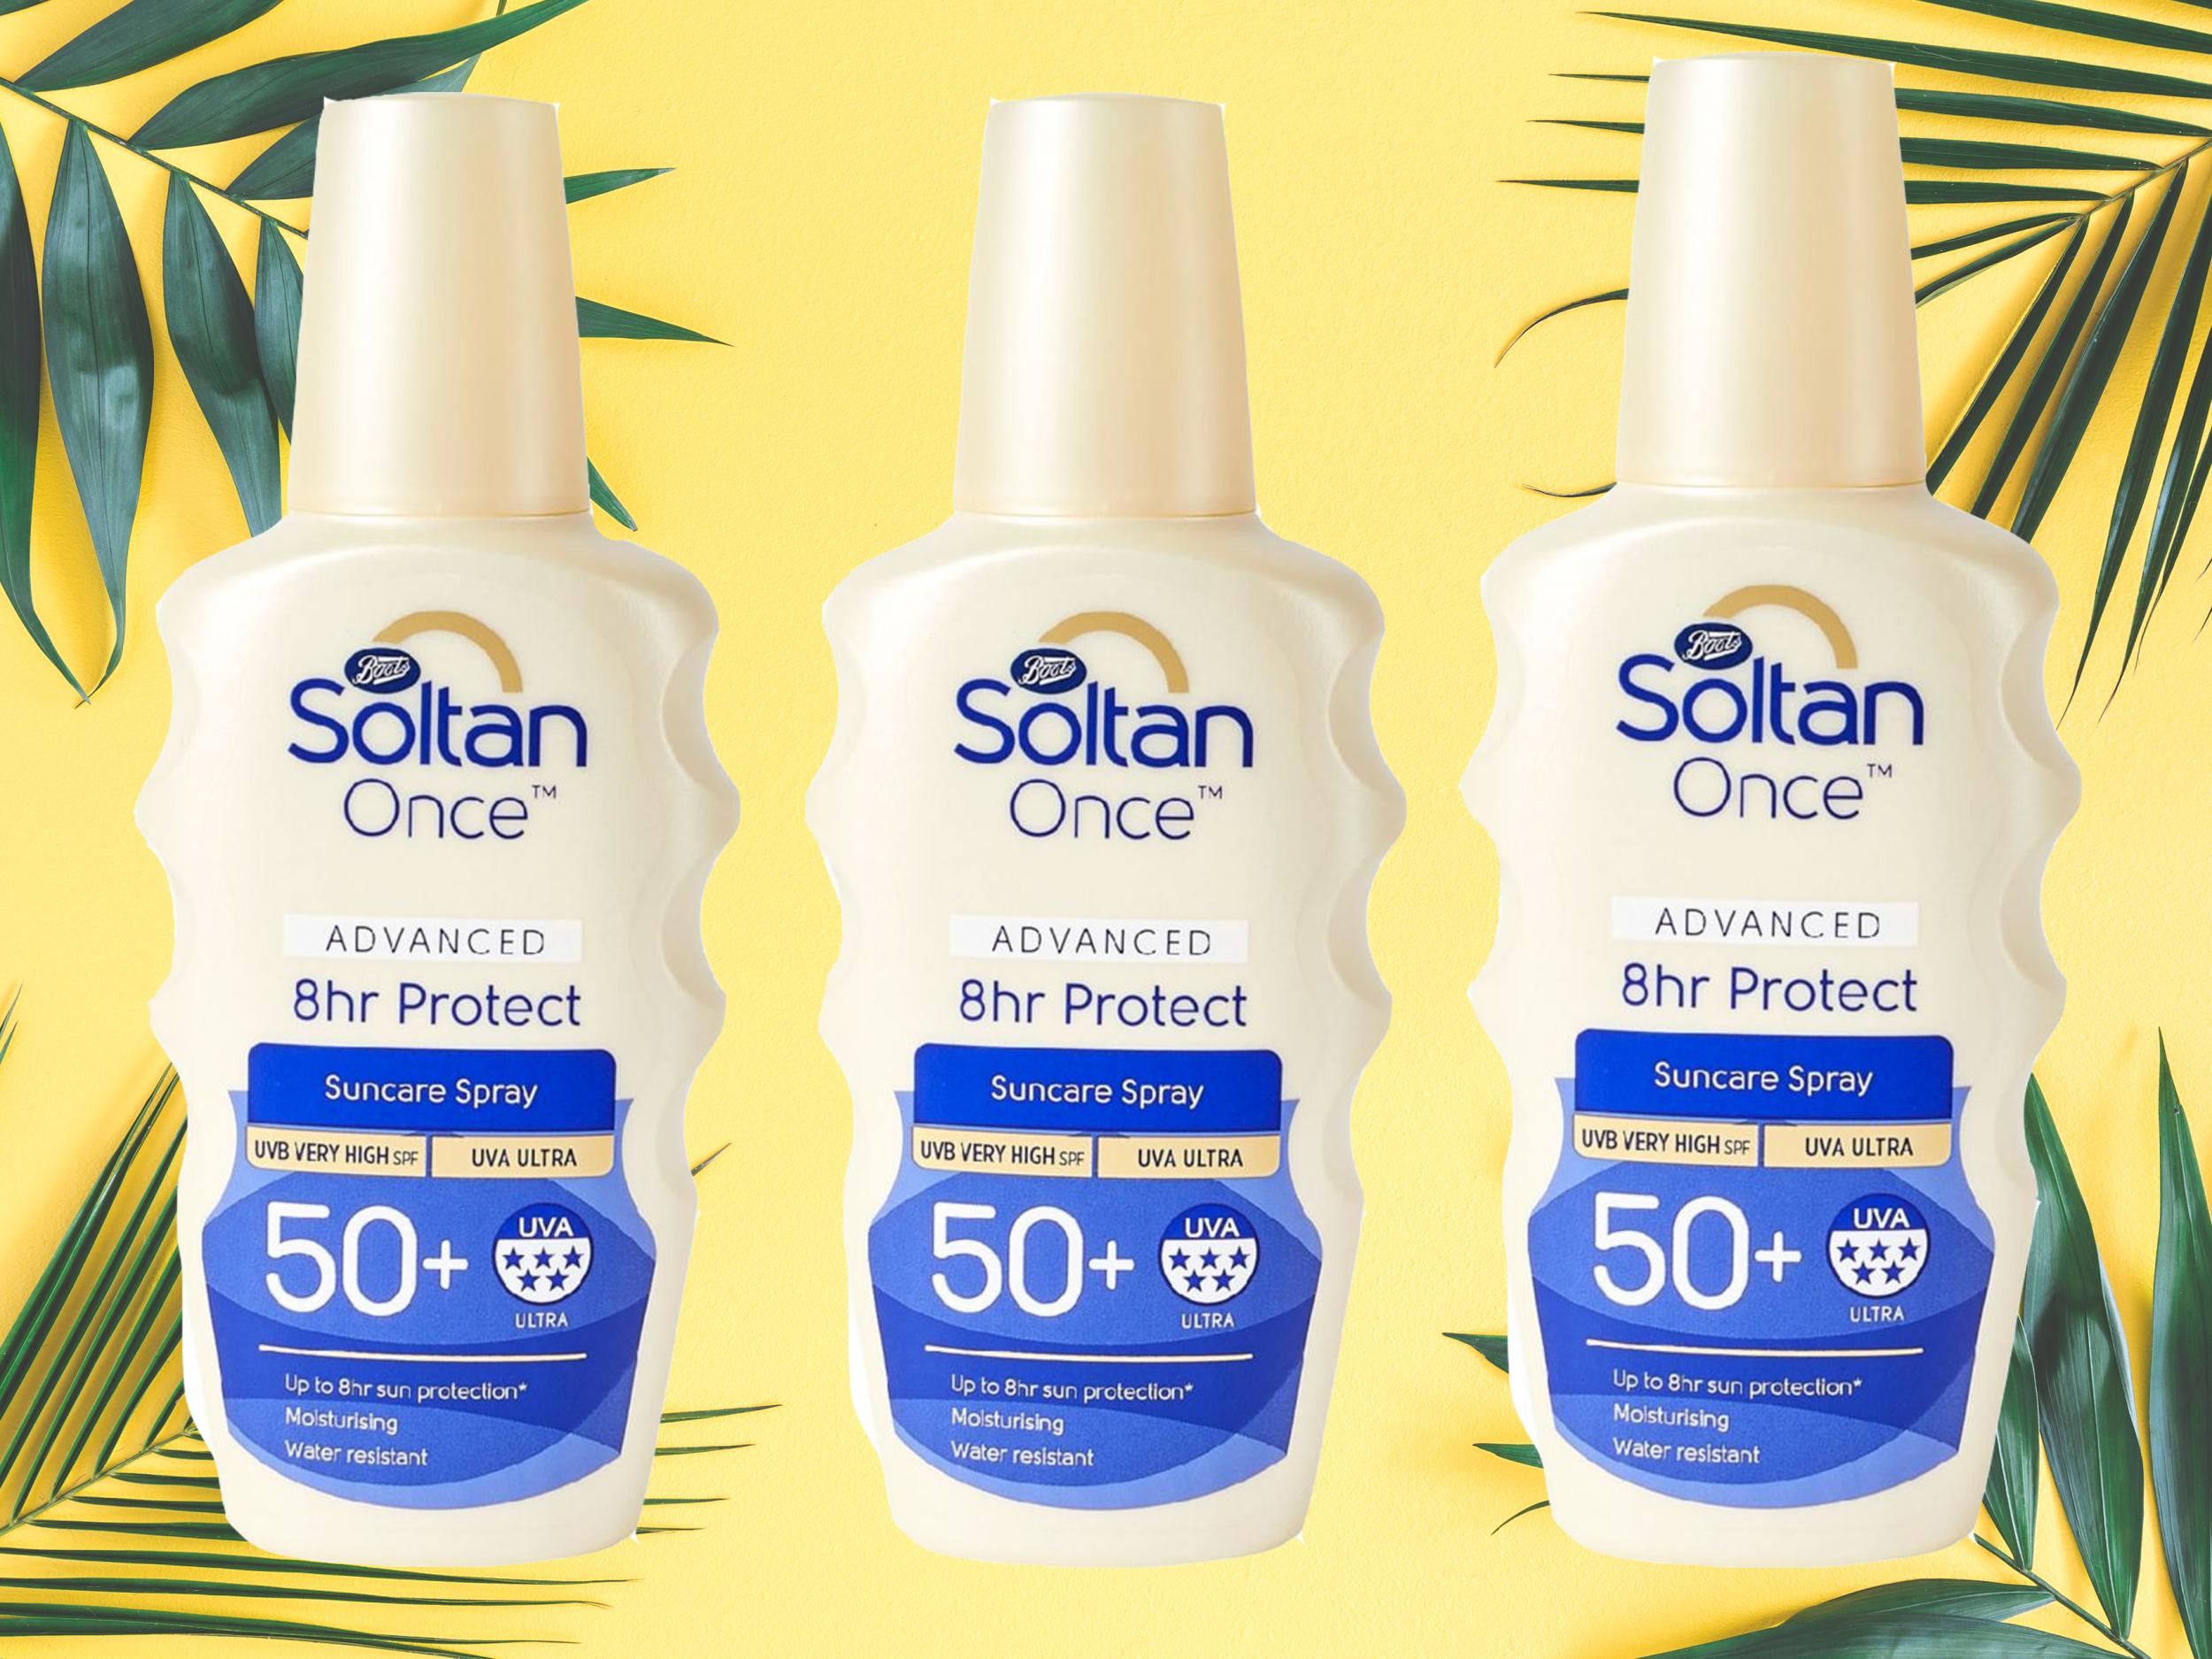 'Once advanced' is Soltan’s hero range with the highest available UVA rating (